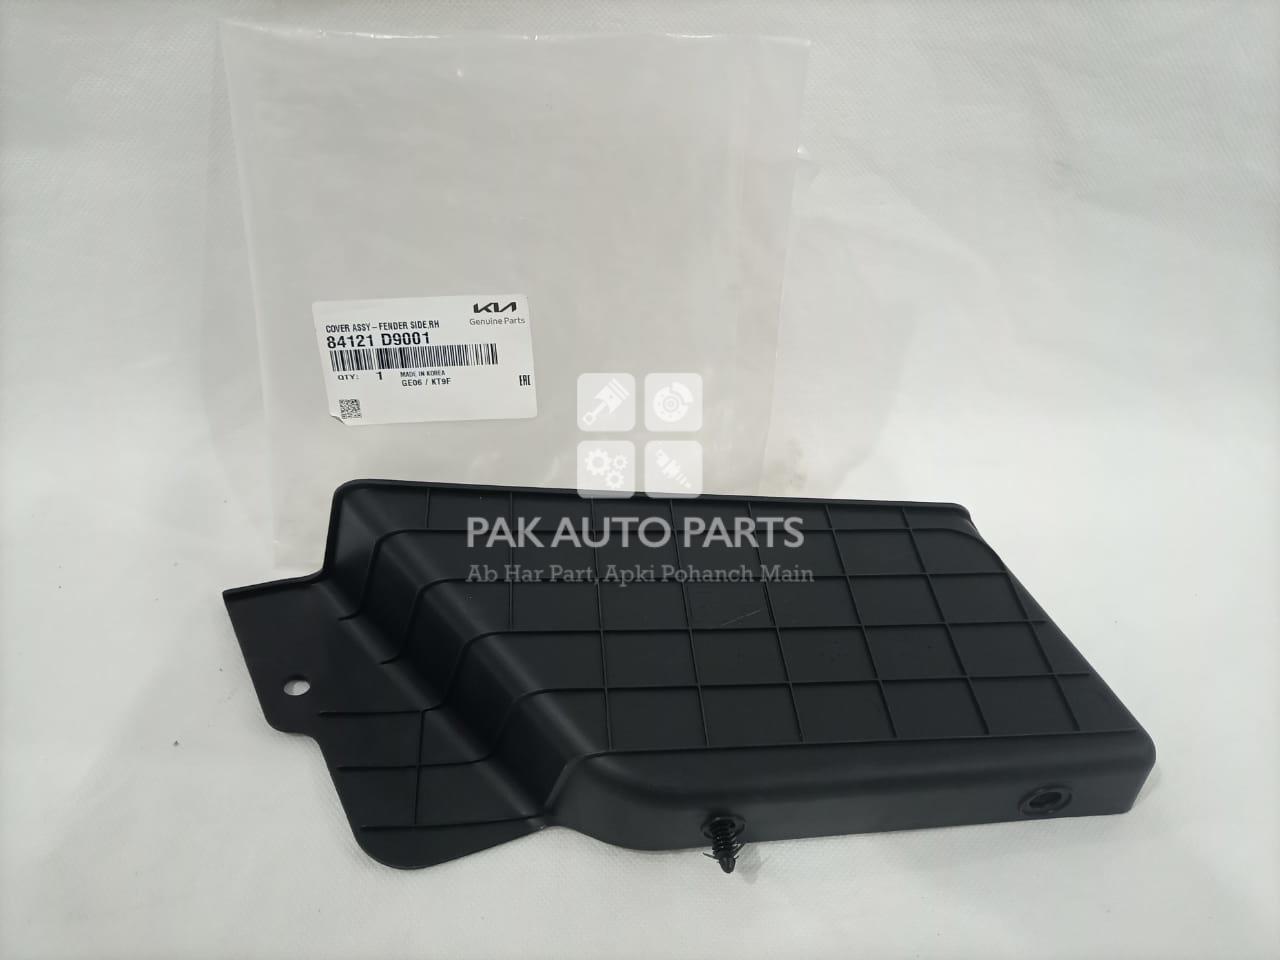 Picture of Kia Spotage 2019-22 Fender Apron Cover Lower